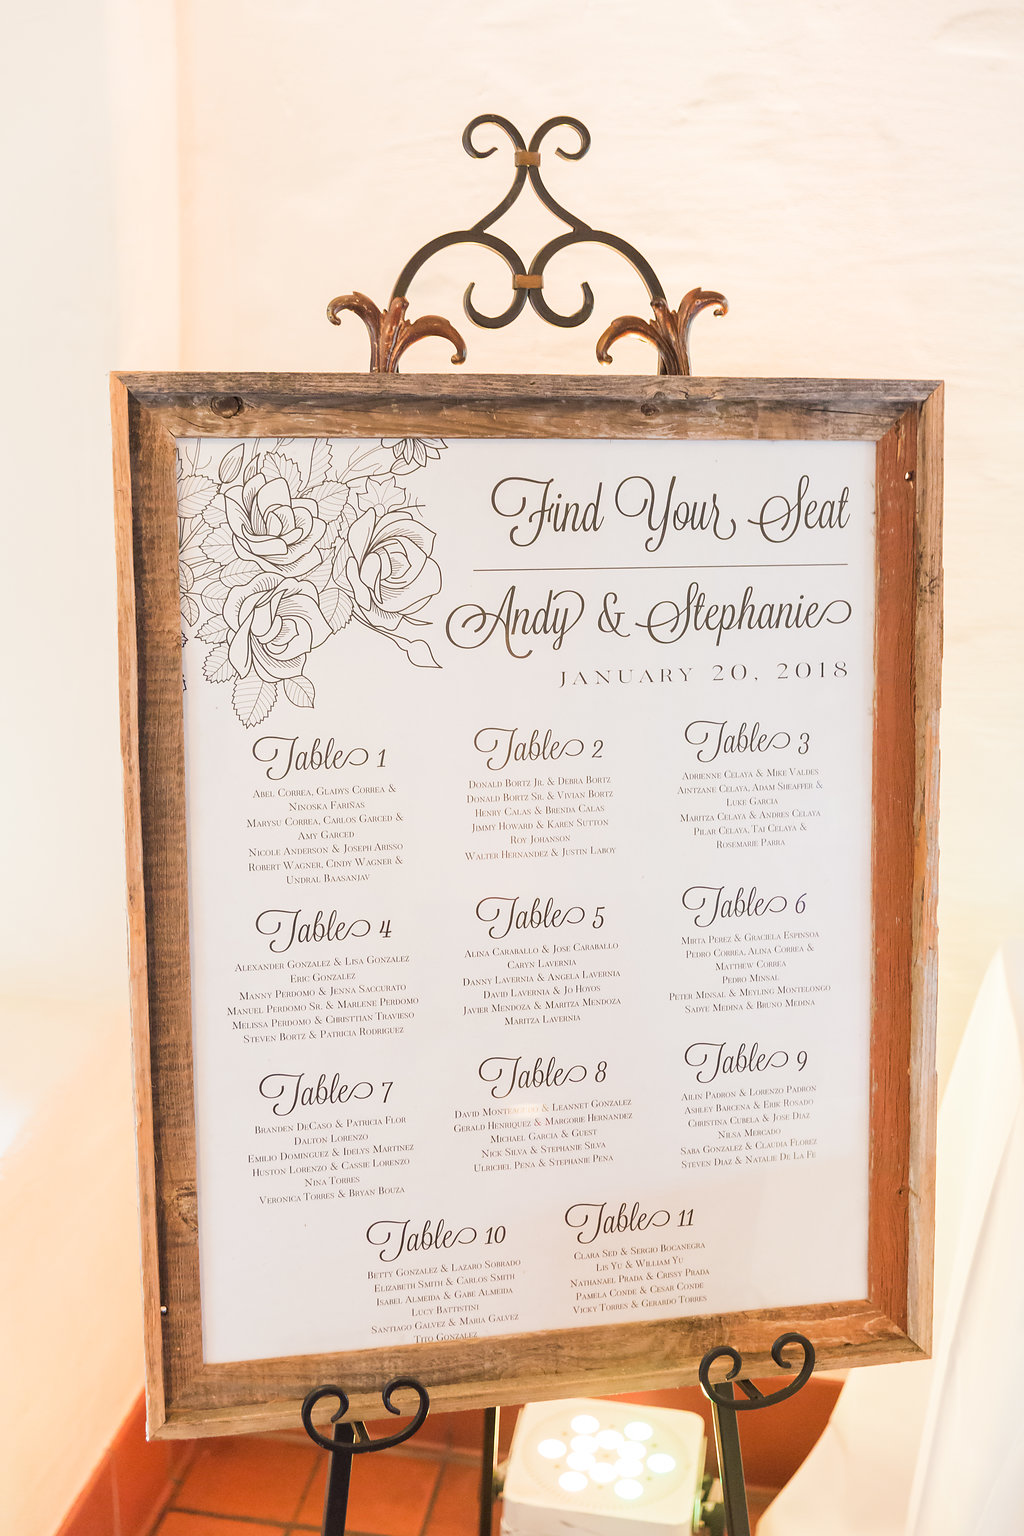 The wedding had a large seating chart, framed and placed on an easel